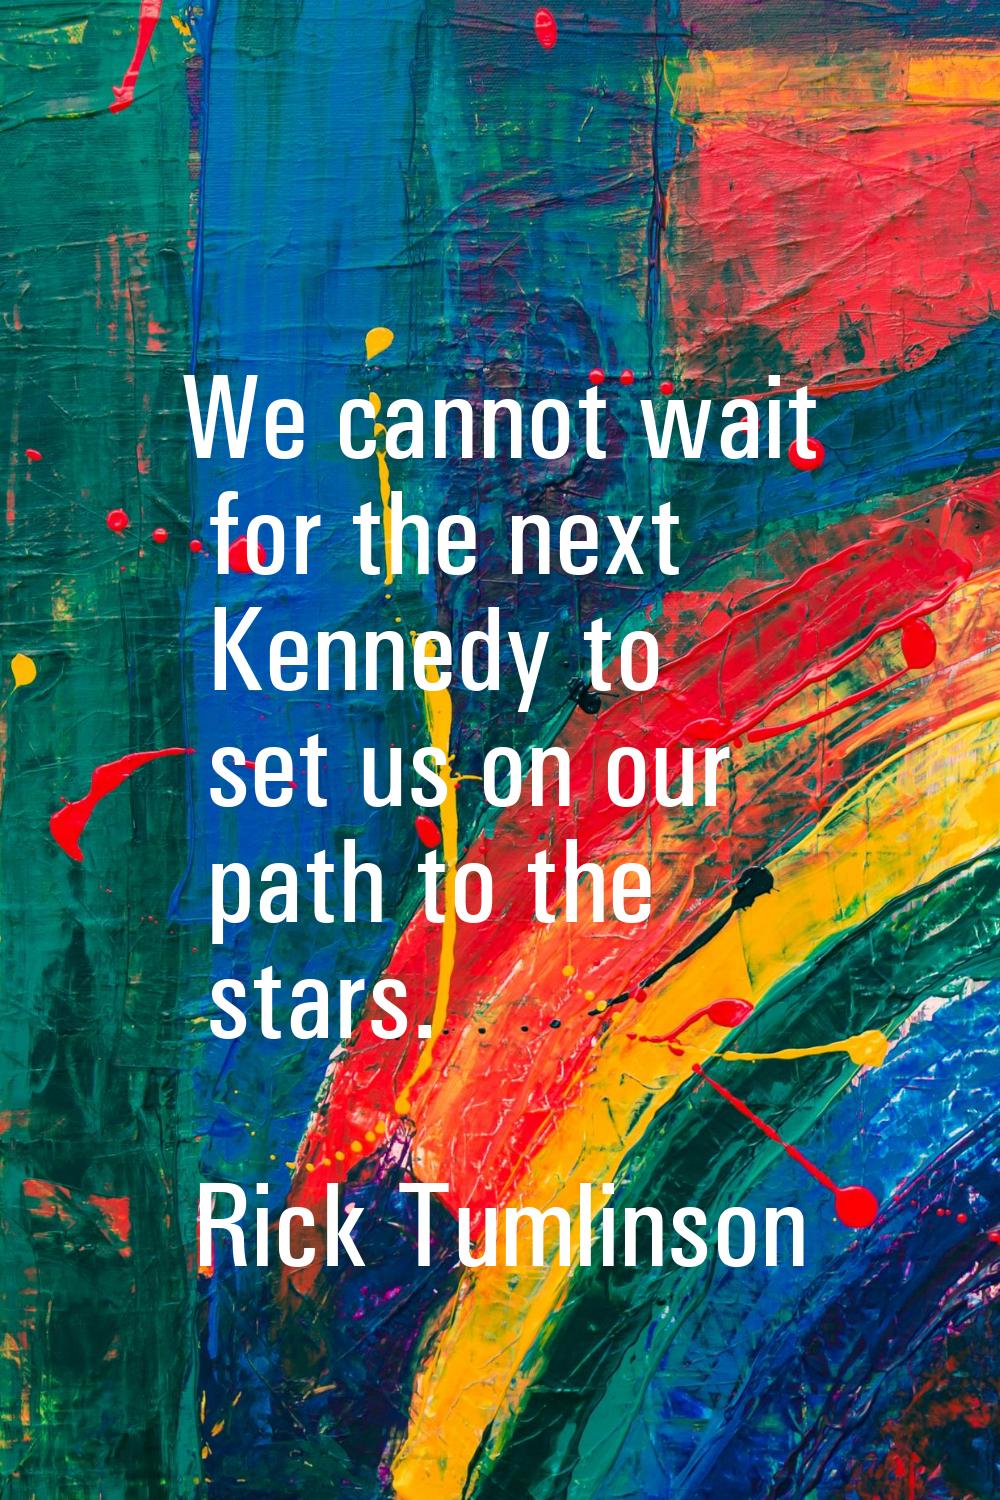 We cannot wait for the next Kennedy to set us on our path to the stars.